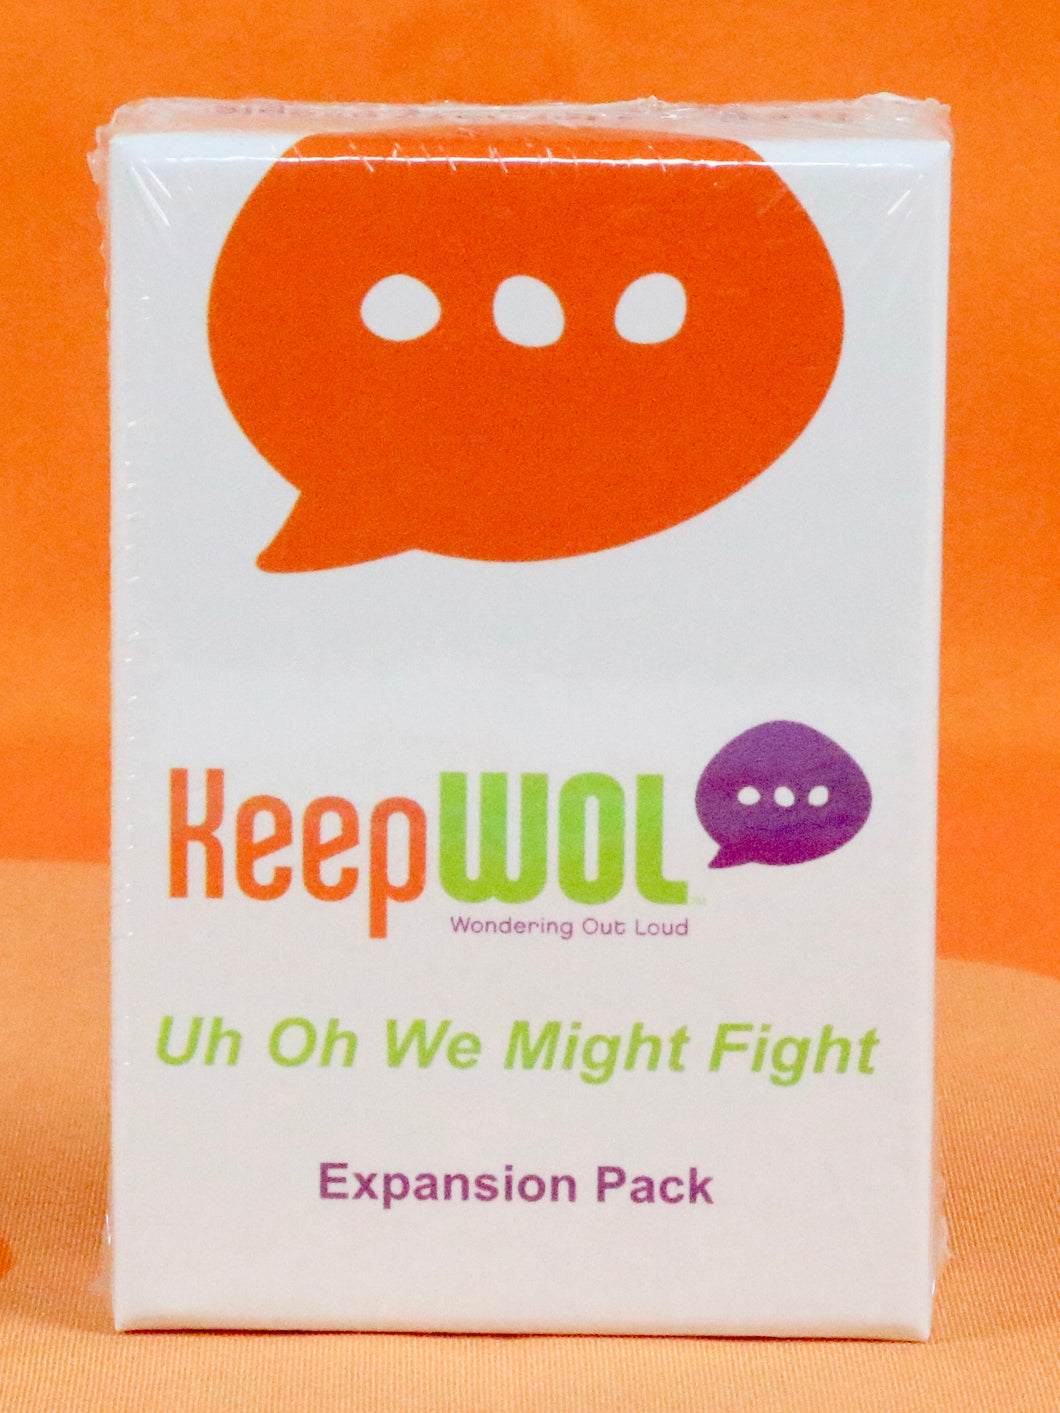 KeepWOL Conversation Card Game | Uh Oh We Might Fight